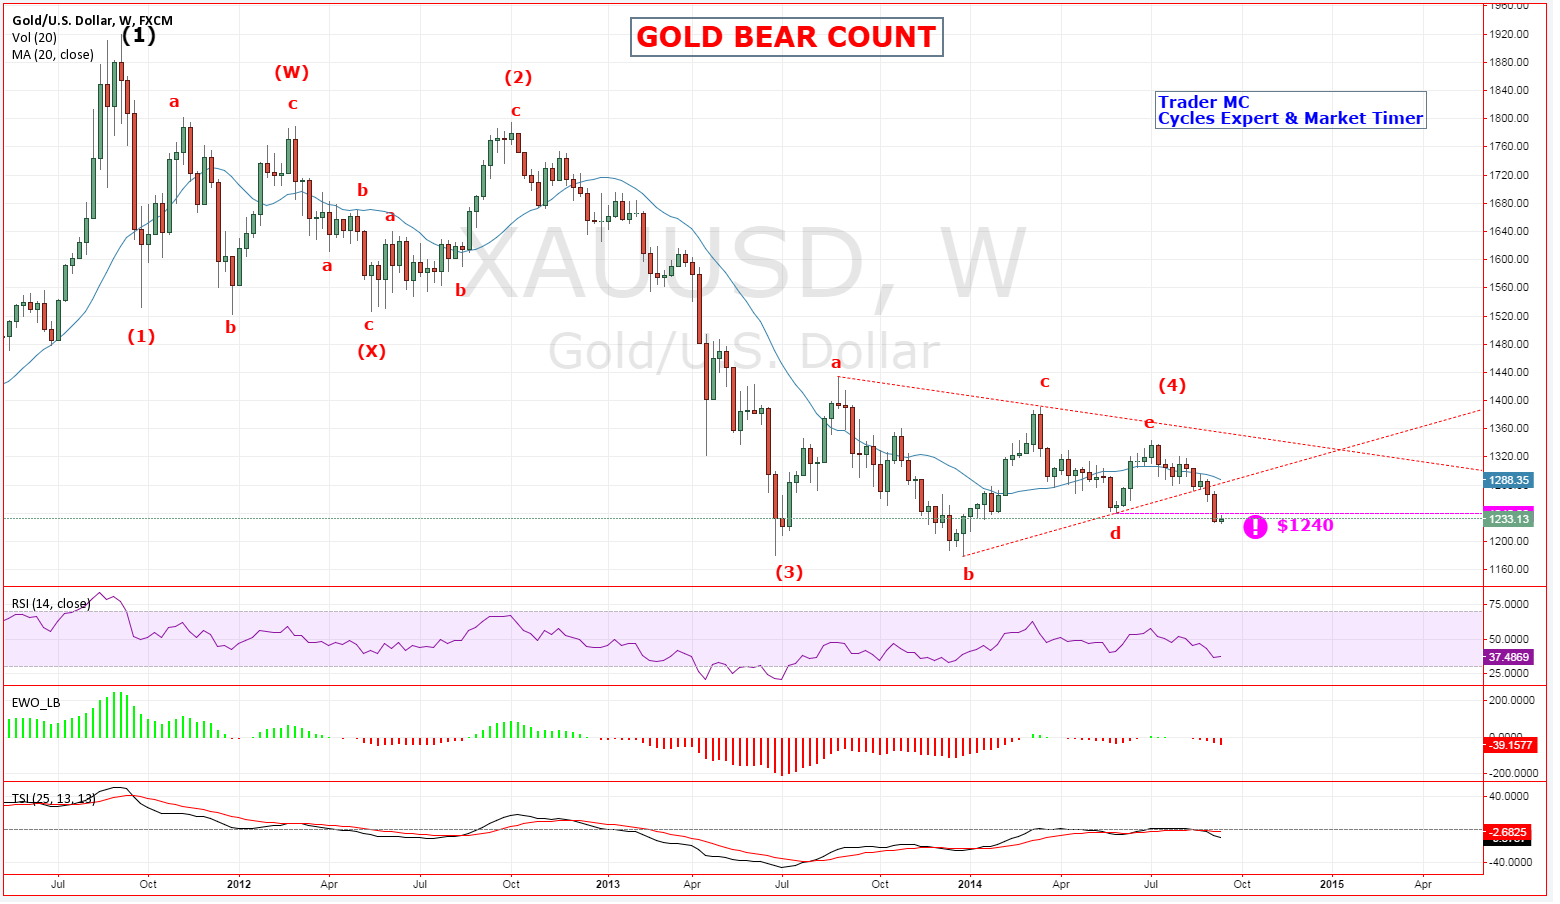 Gold: Bear Count